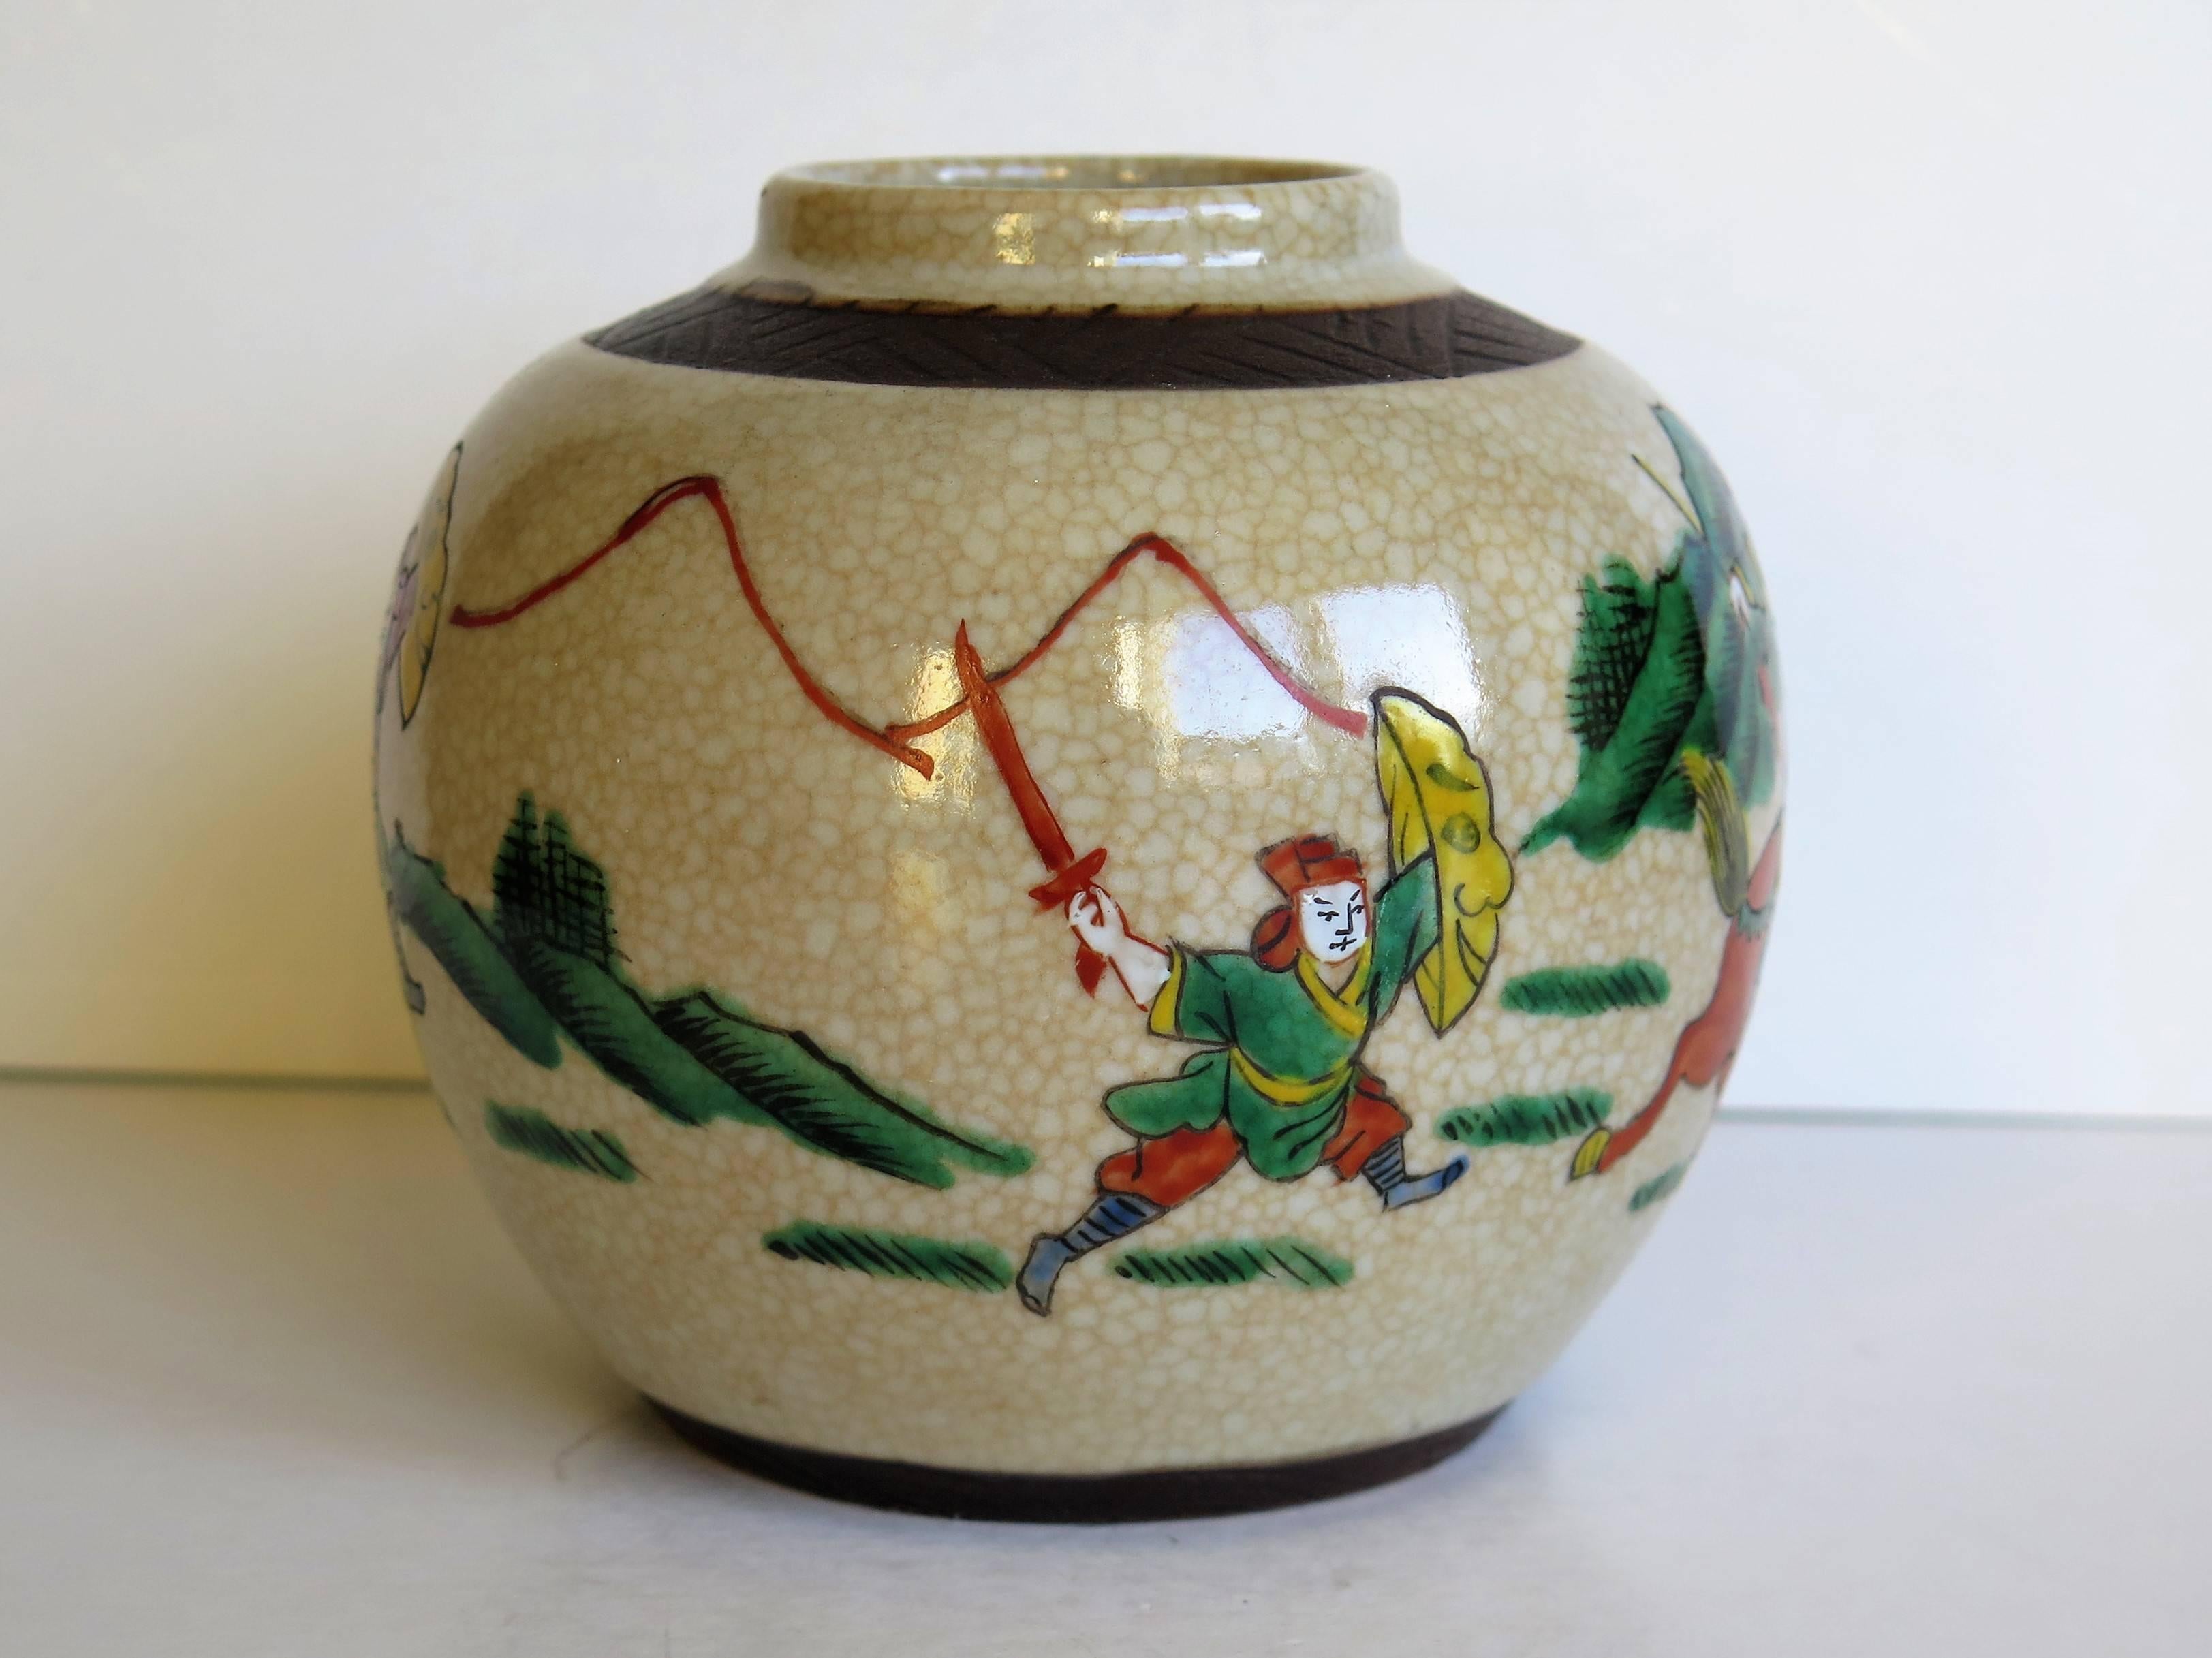 This is a good small ceramic jar produced in China, in the late Qing period of the early 20th century, for the Export market.

The jar has a creamy crackle glaze ground which is nicely hand decorated in polychrome enamels using burnt orange, green,